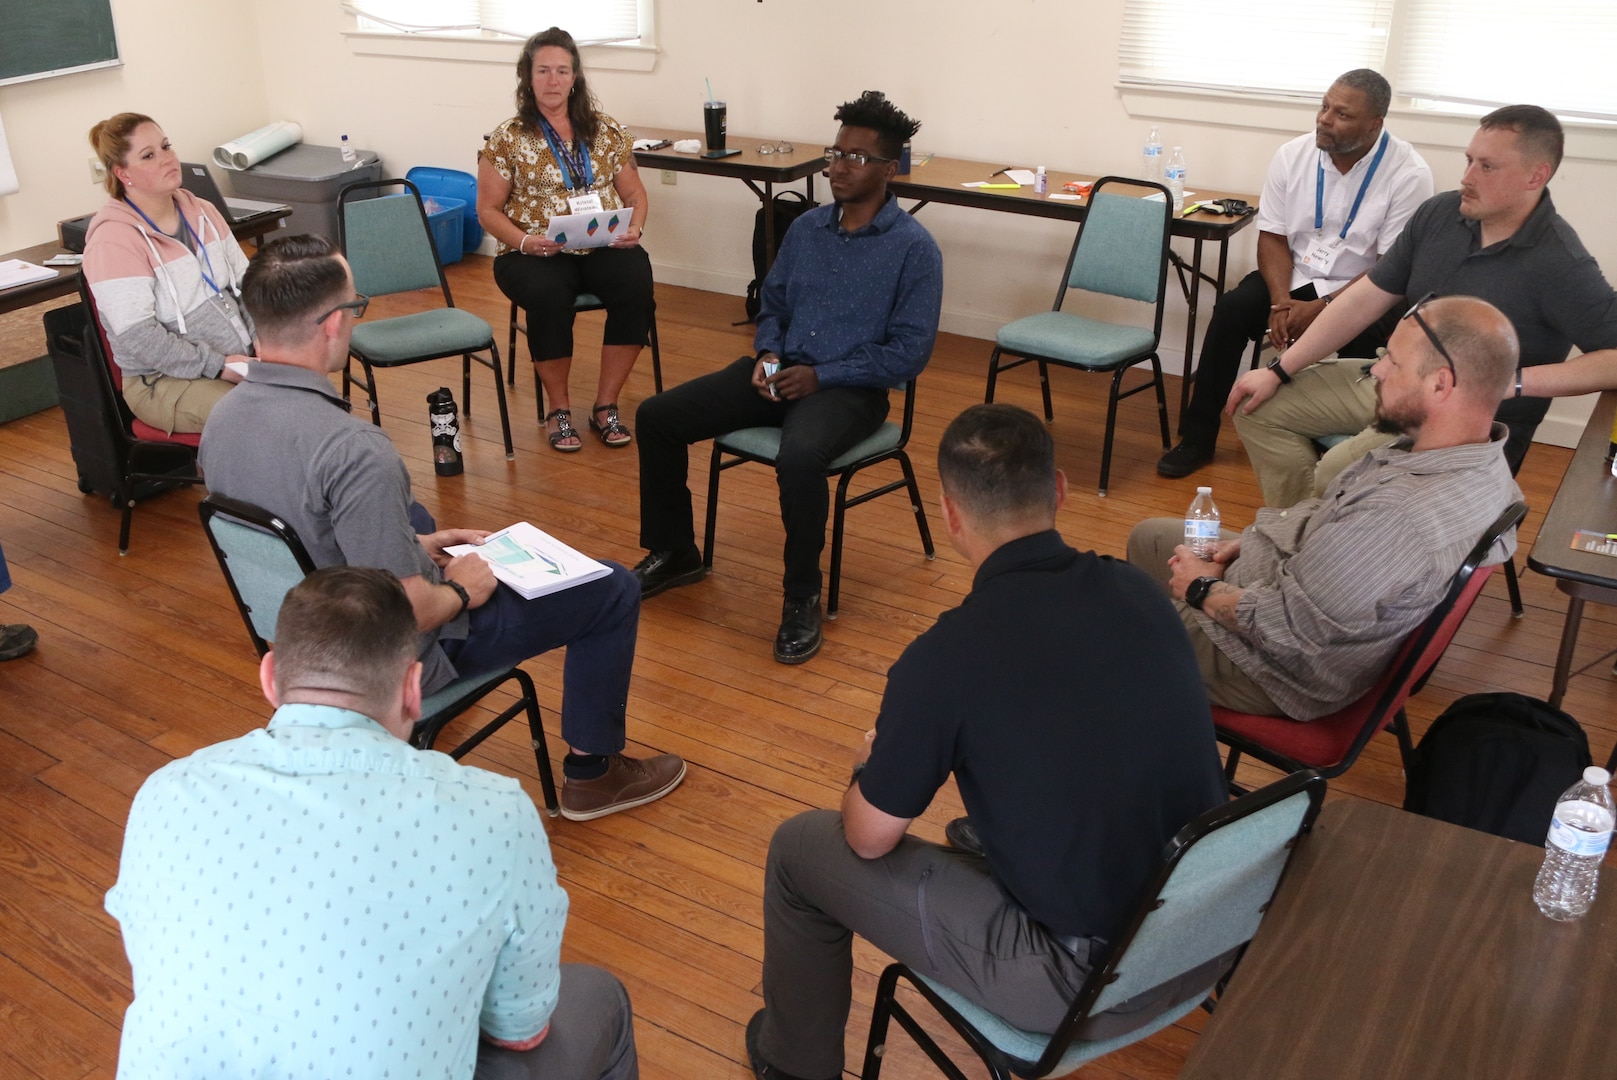 Suicide Intervention Officer training provides tactics to assist fellow Soldiers